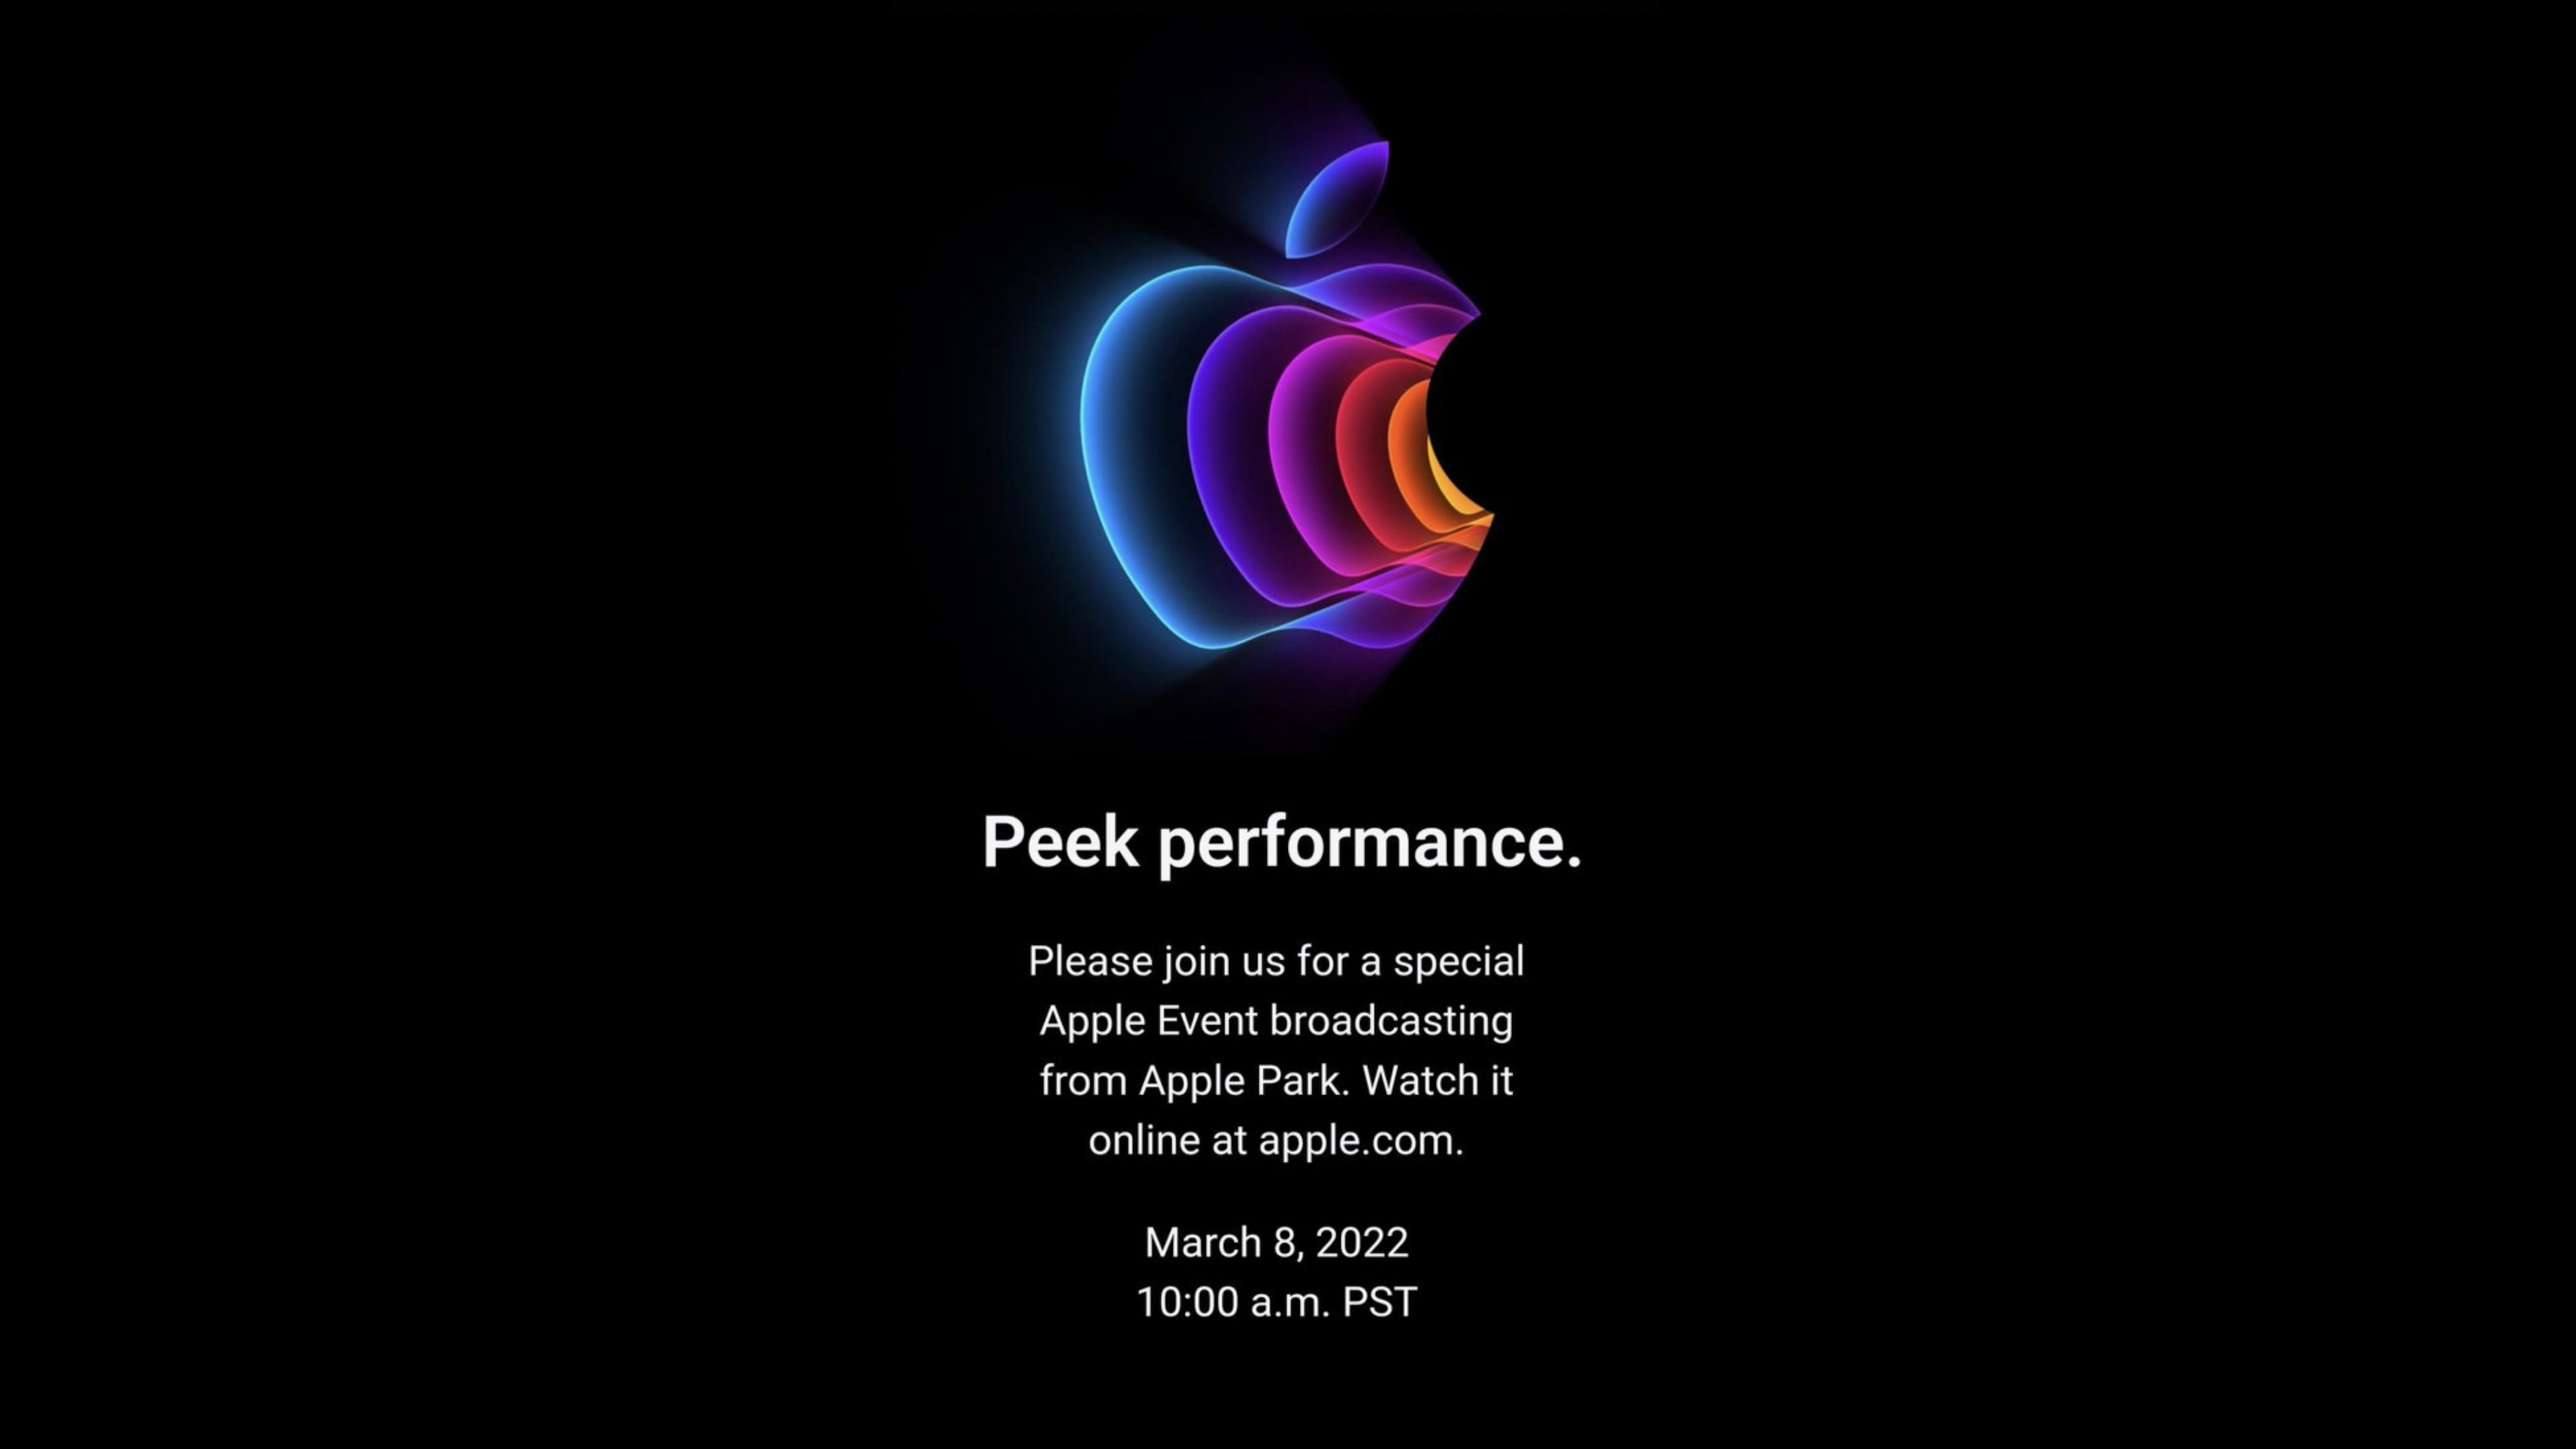 Official invite graphics for Apple's event on March 8, 2022 with the tagline “Peek performance”